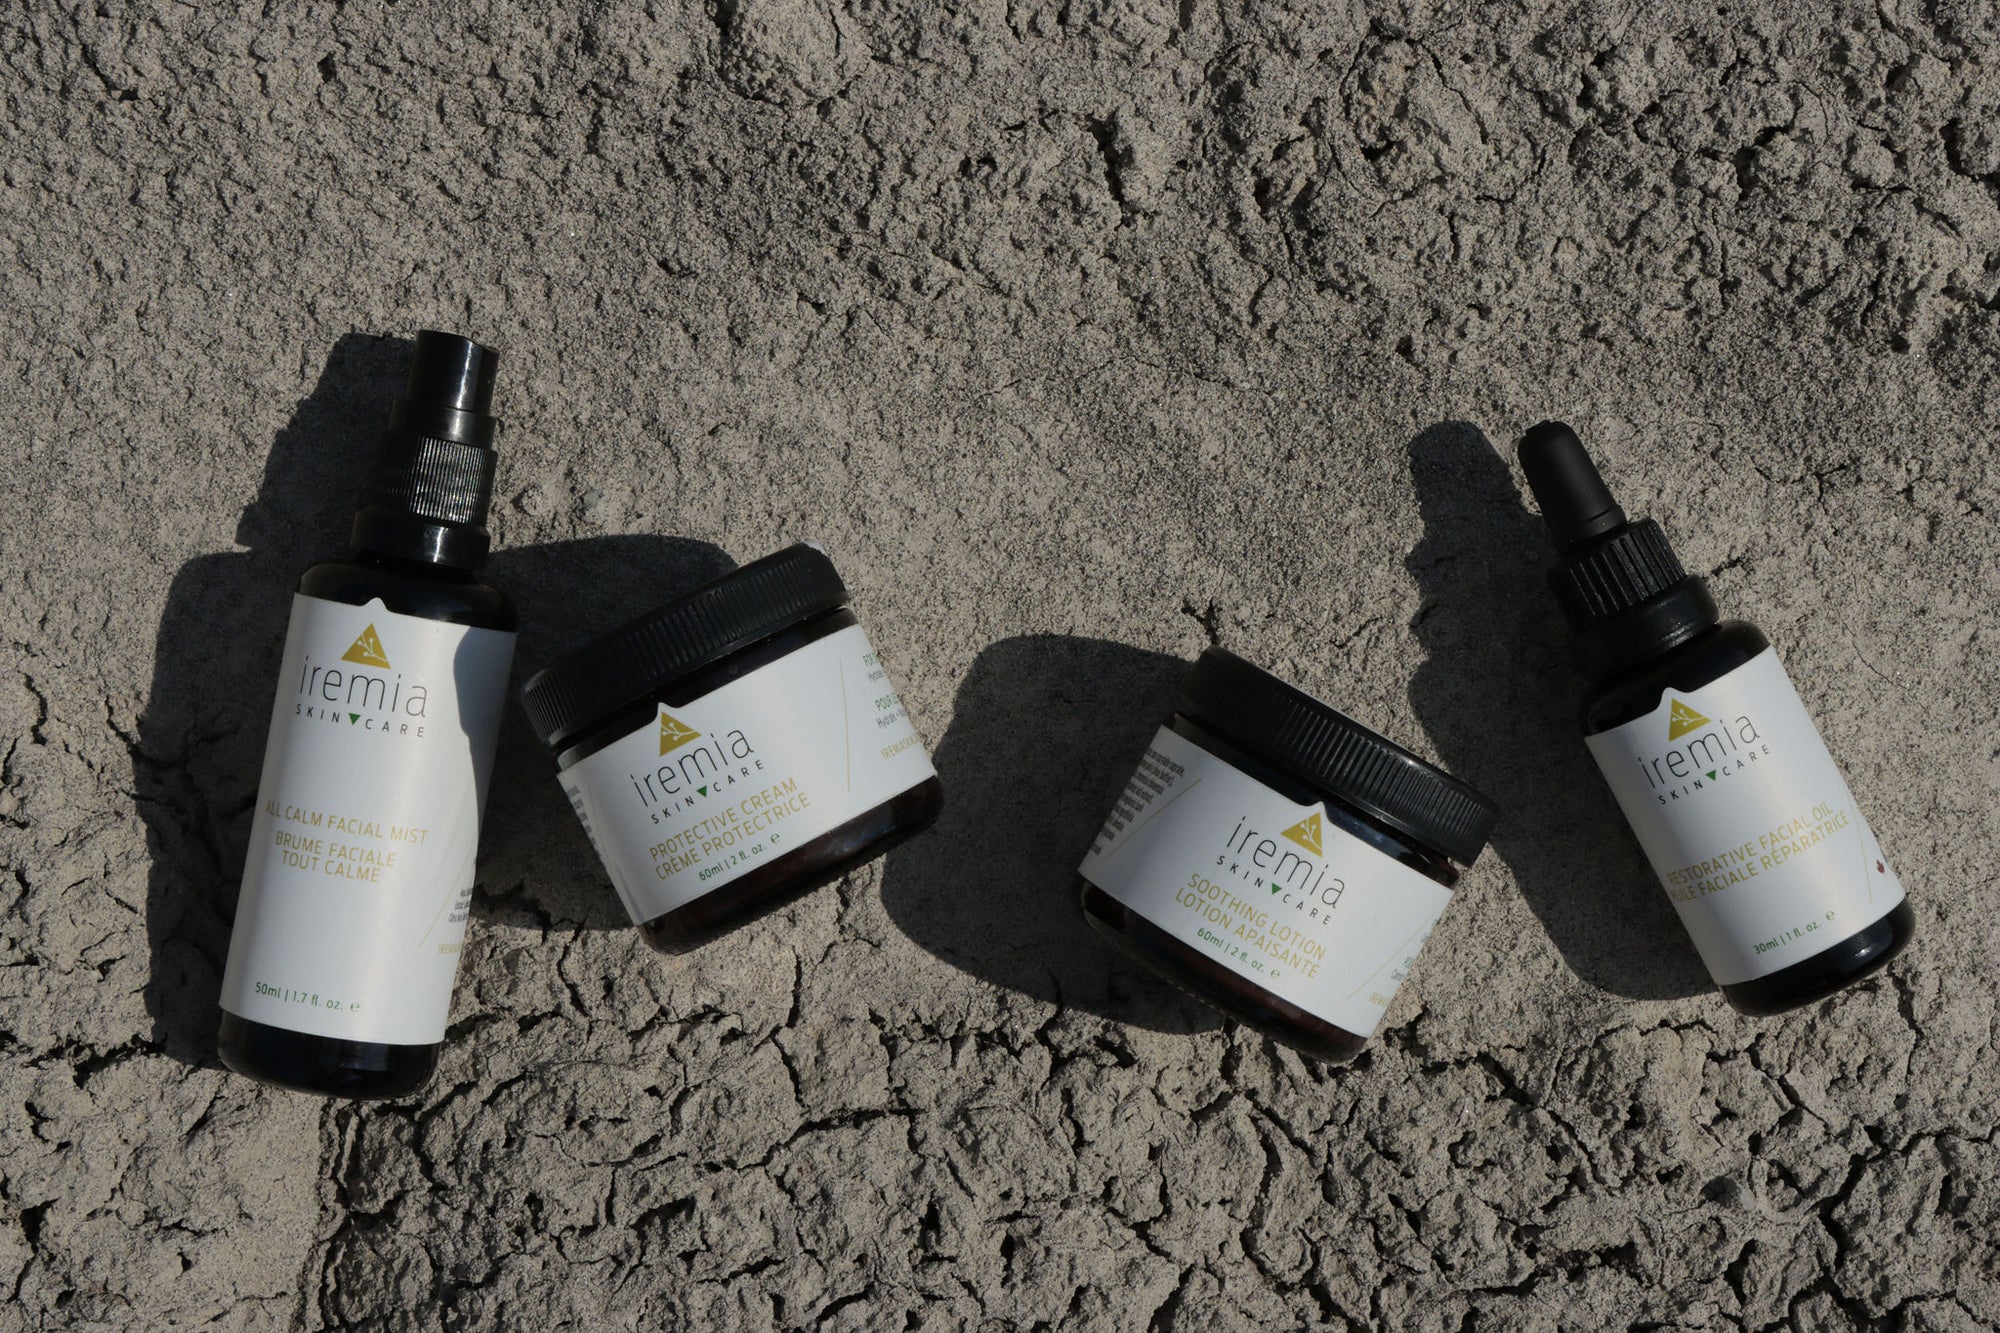 ​Iremia Skincare is an award-winning, natural skincare company that was created to help soothe and manage sensitive skin.